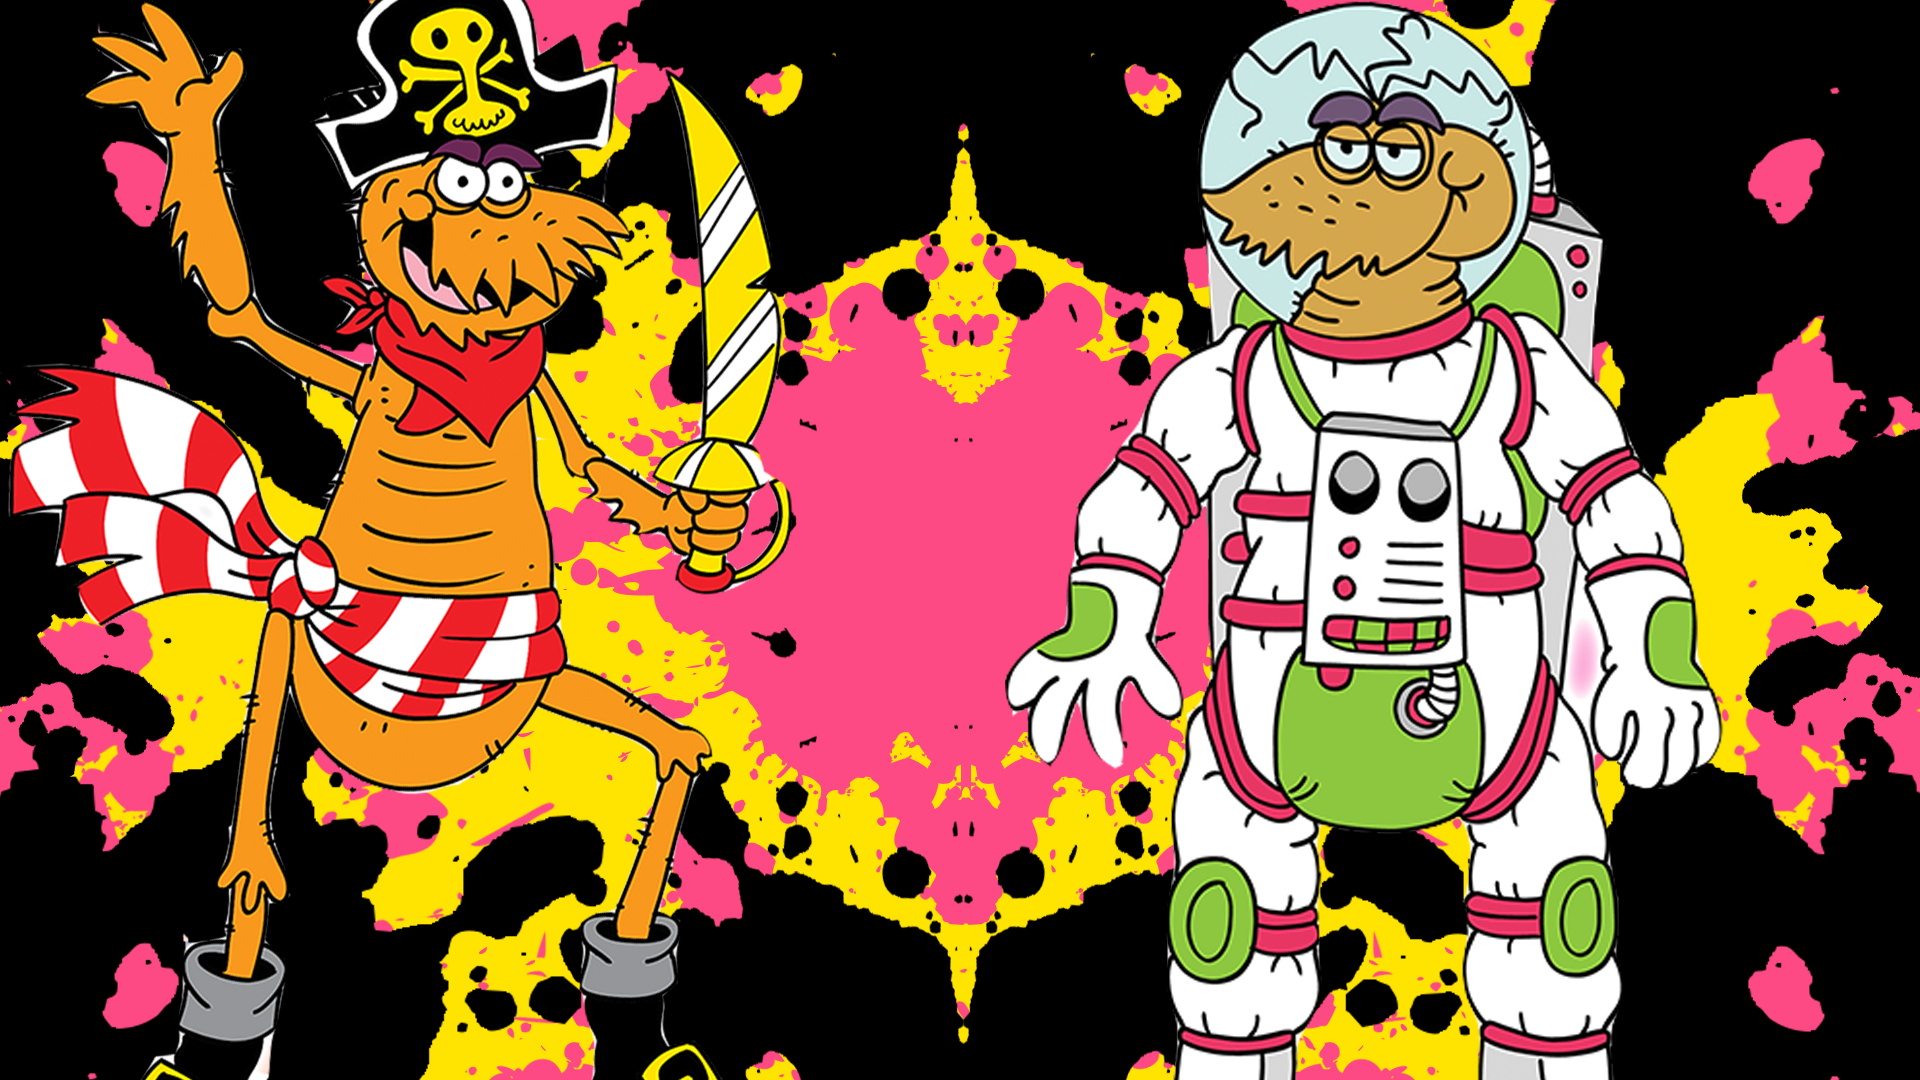 Space flea and pirate flea on splodge background